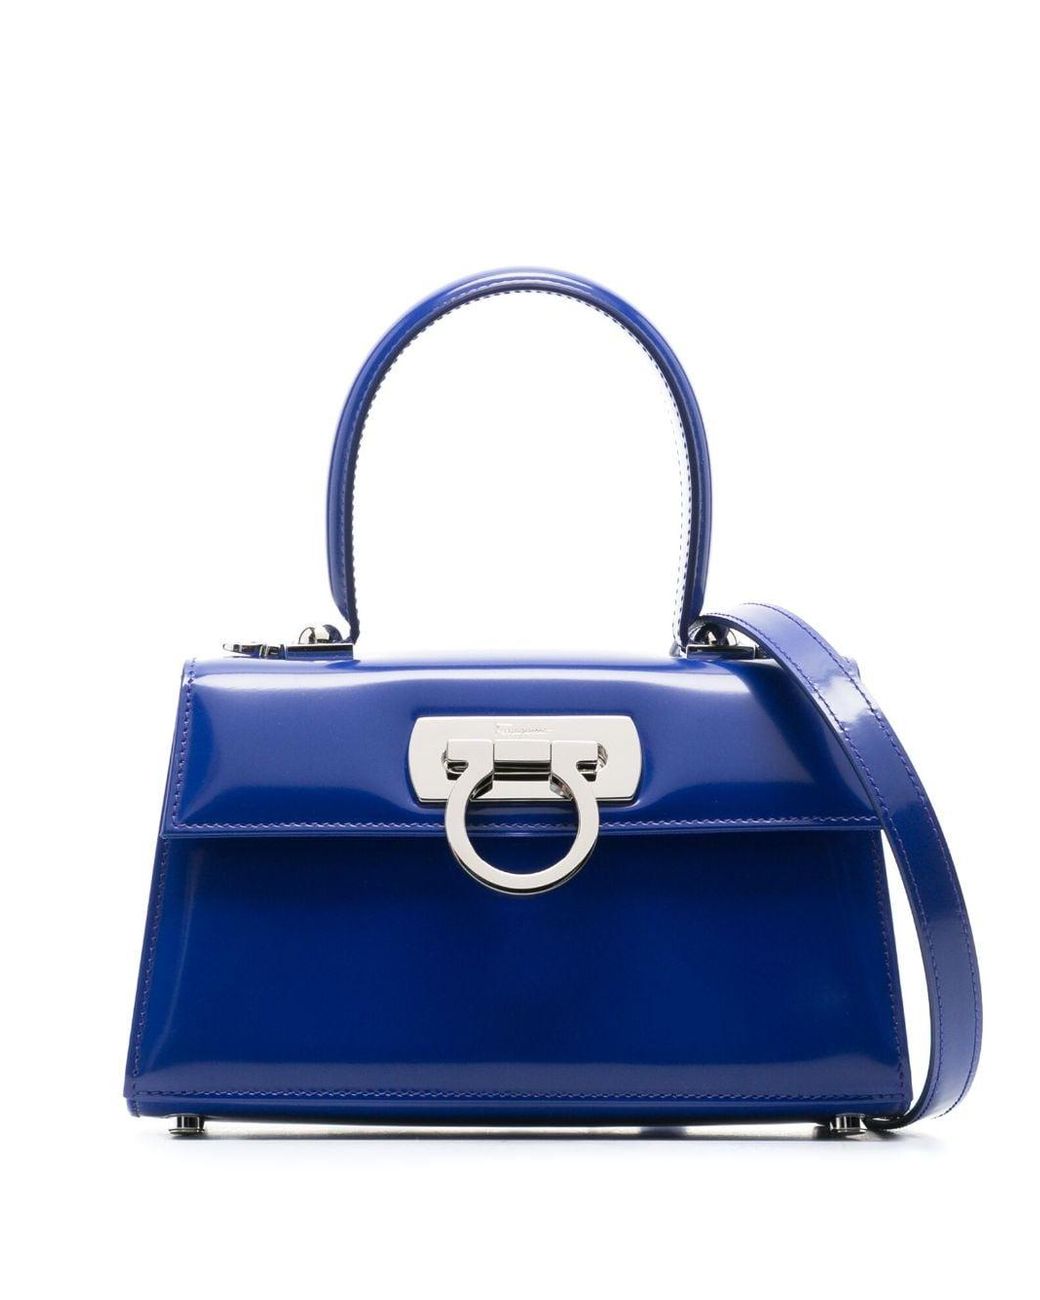 Ferragamo Iconic Leather Tote Bag in Blue | Lyst